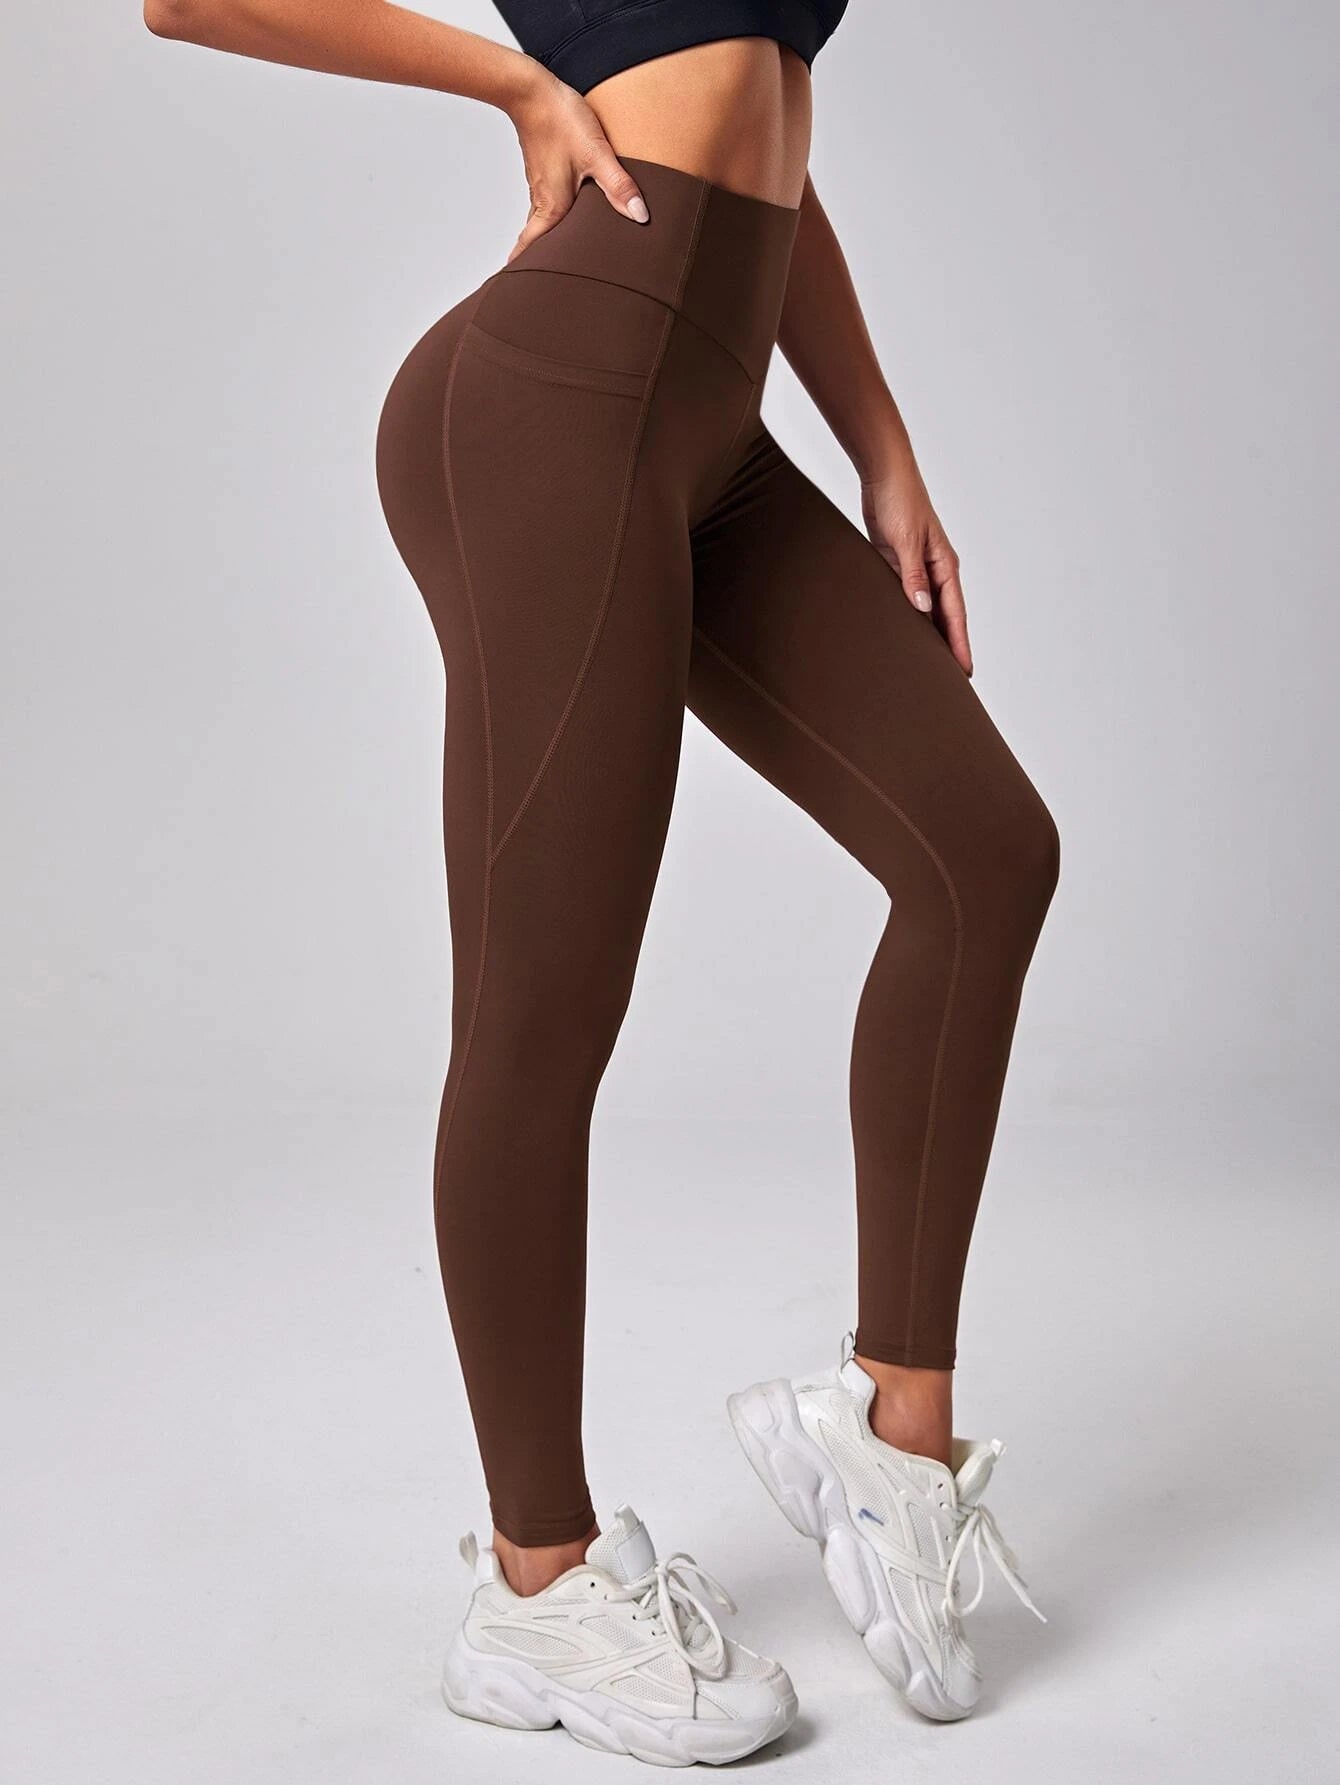 Get moving with the best gym leggings for every workout. Shop Now